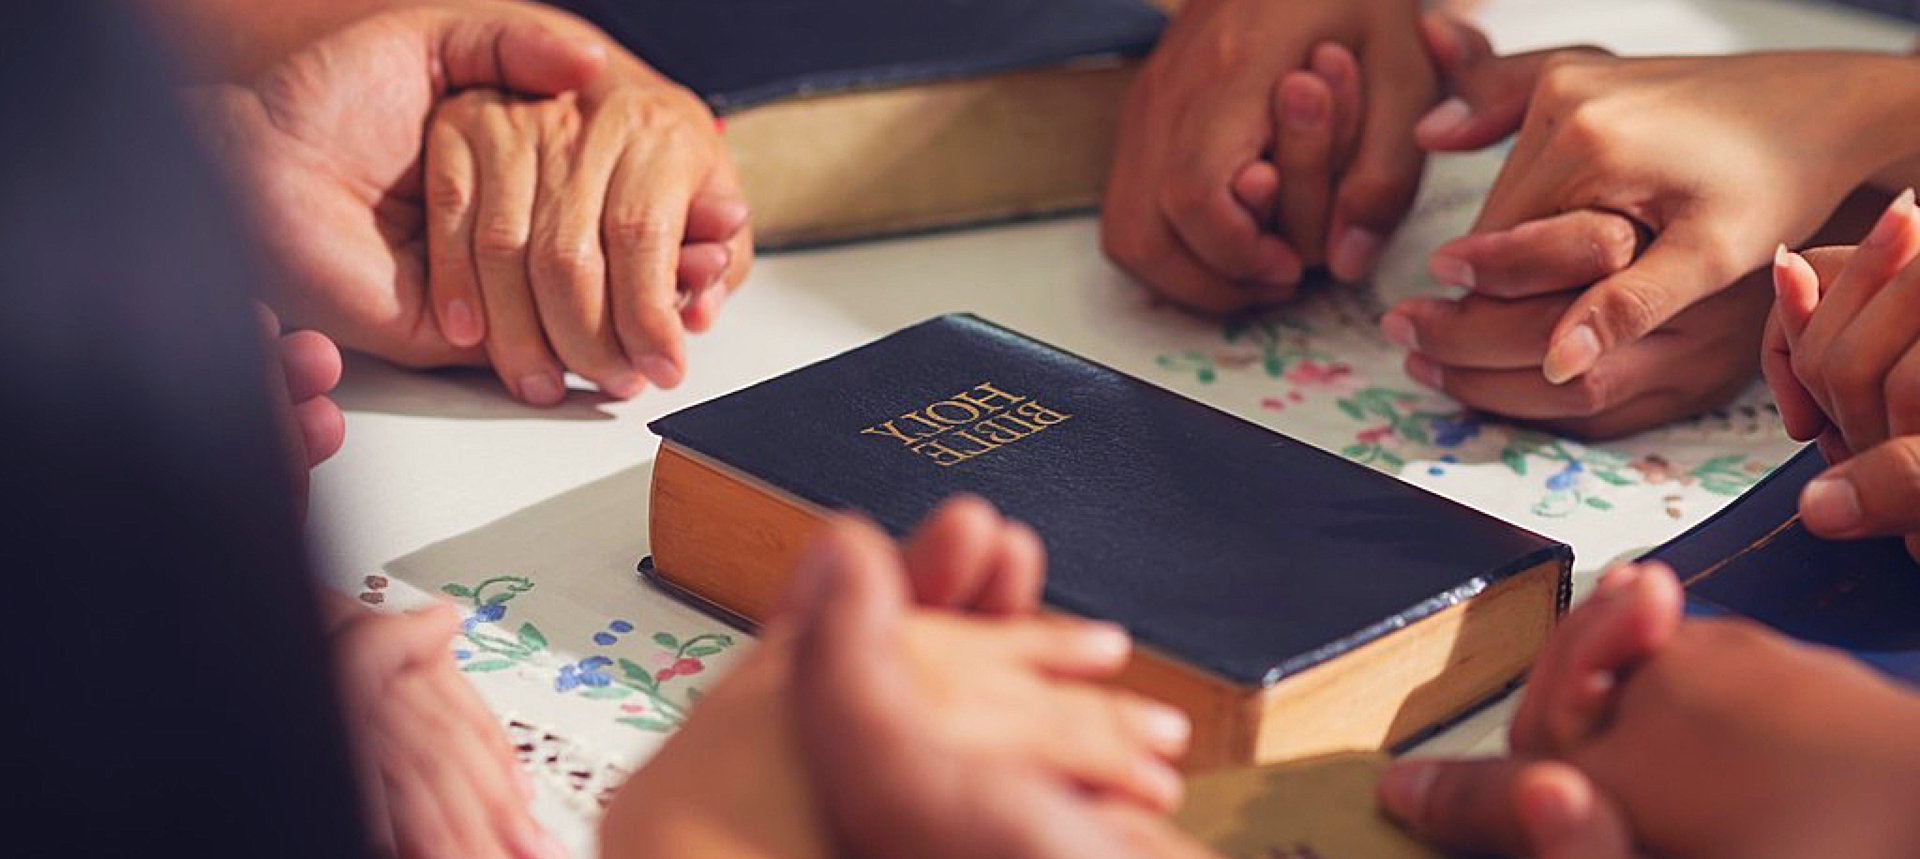 people holding hands with the bible at the center